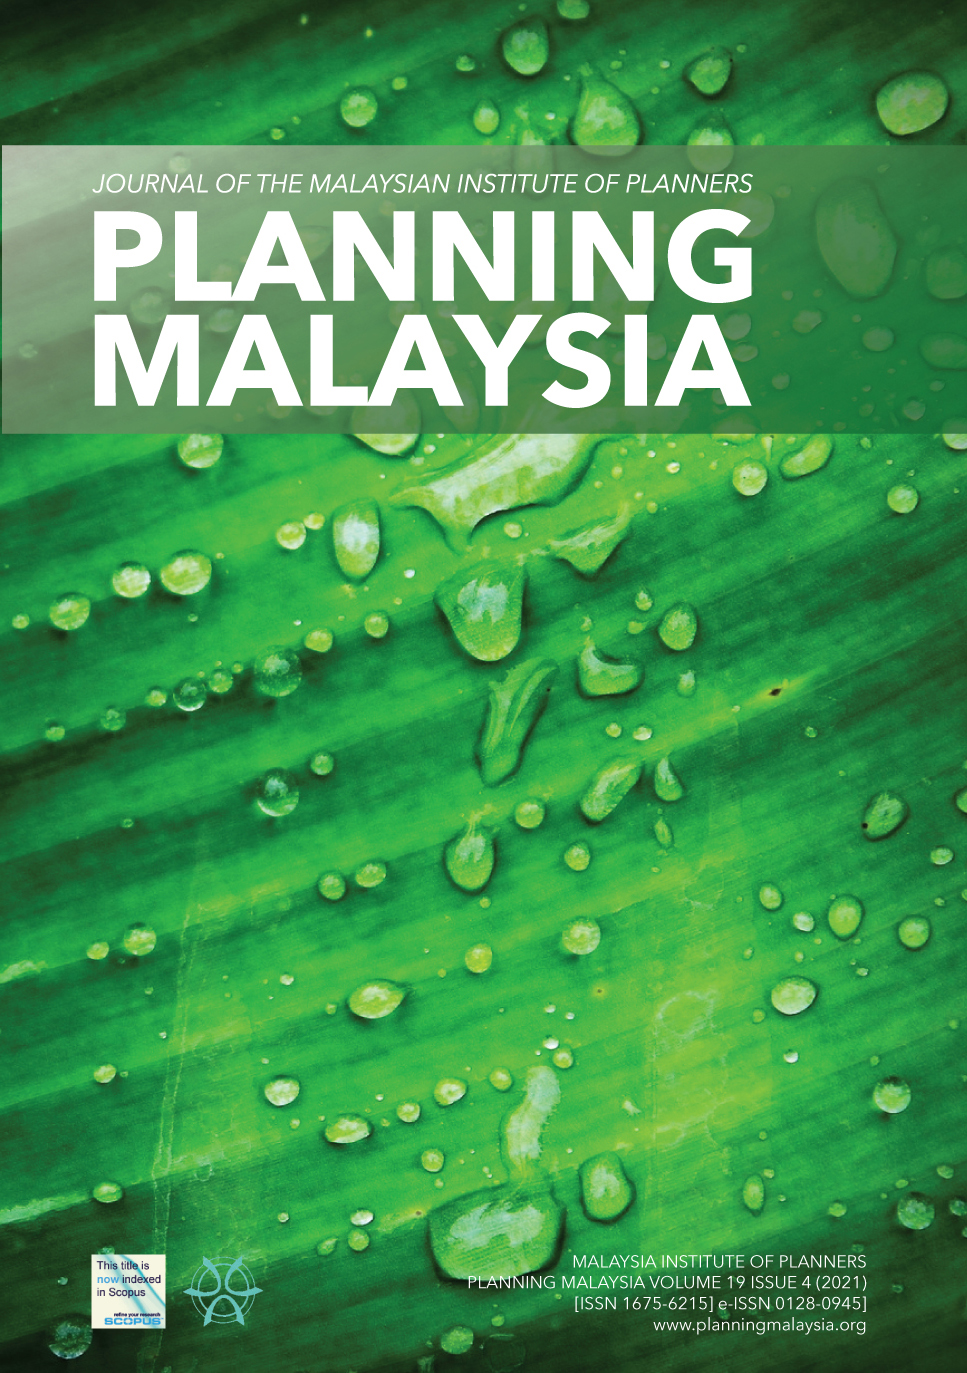 					View Vol. 19 (2021): PLANNING MALAYSIA JOURNAL : Volume 19, Issue 4, 2021
				